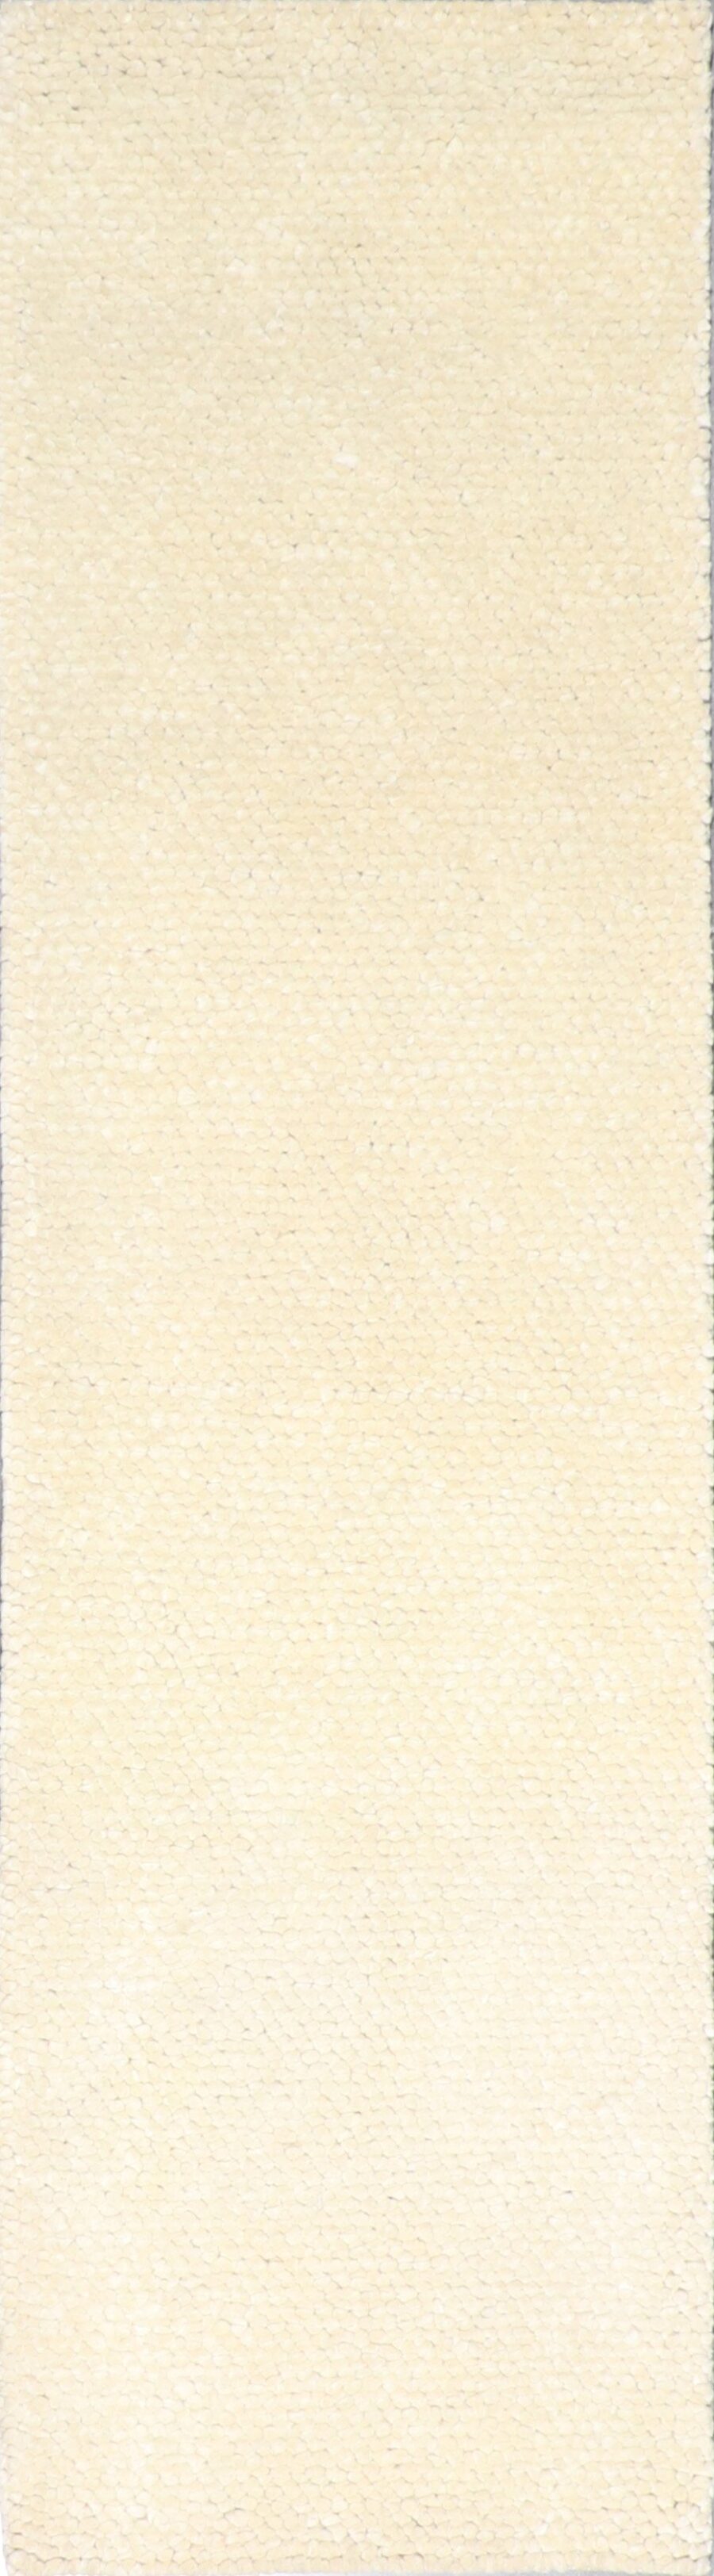 2'5"x9'4" Contemporary Ivory Wool Hand-Tufted Rug - Direct Rug Import | Rugs in Chicago, Indiana,South Bend,Granger